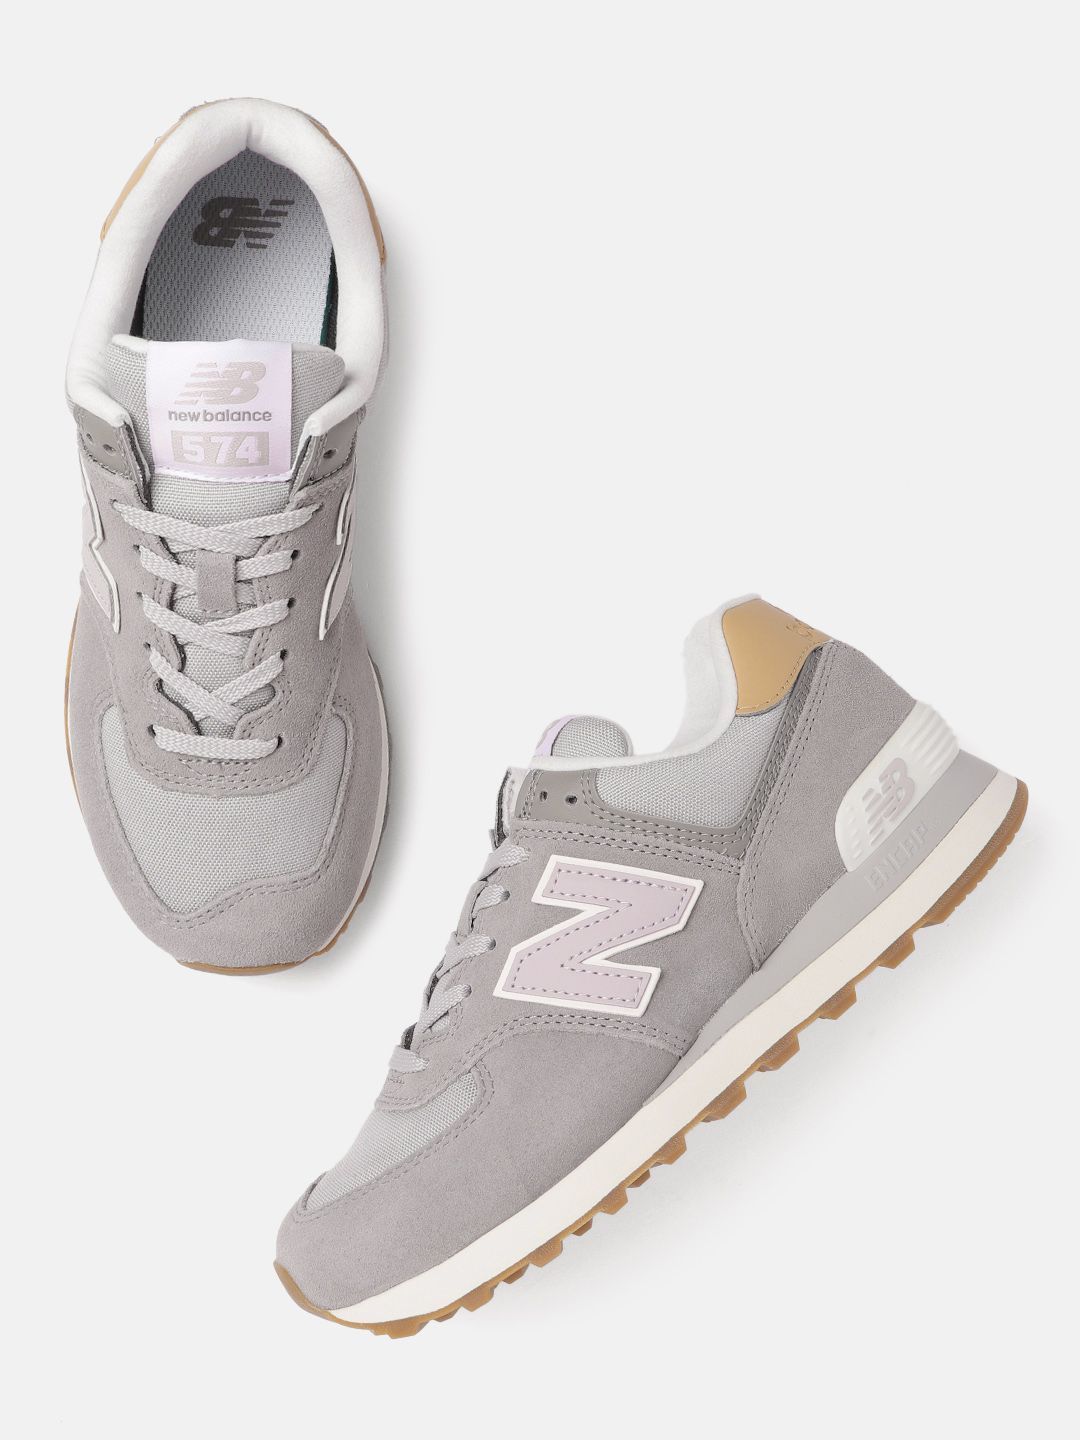 New Balance Women Grey Solid Sneakers Price in India